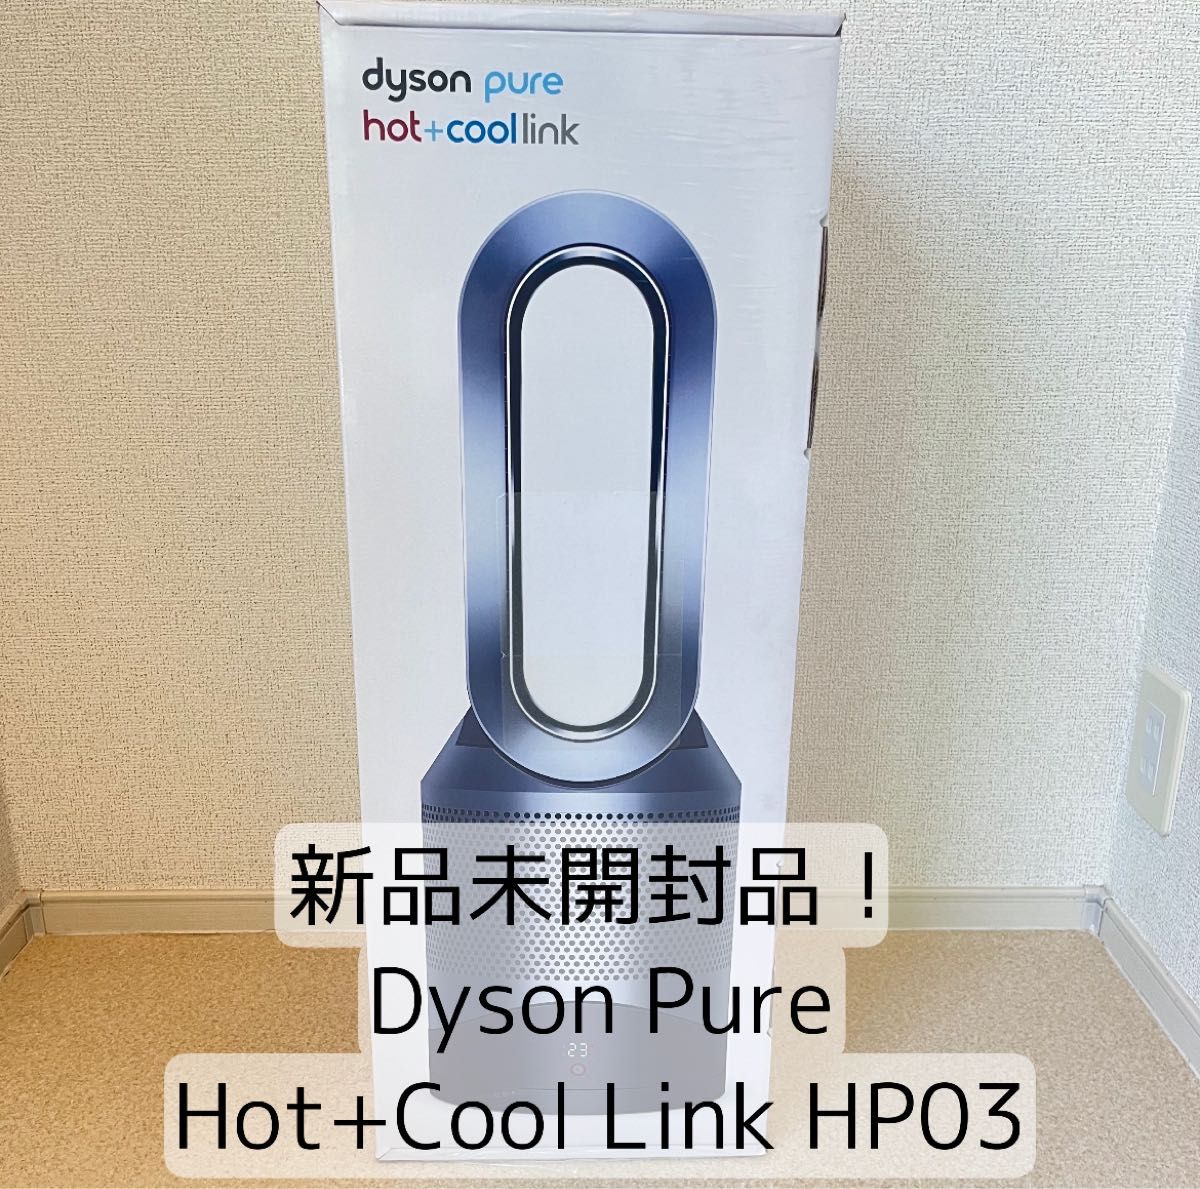 Dyson Pure Hot+Cool Link HP03｜PayPayフリマ